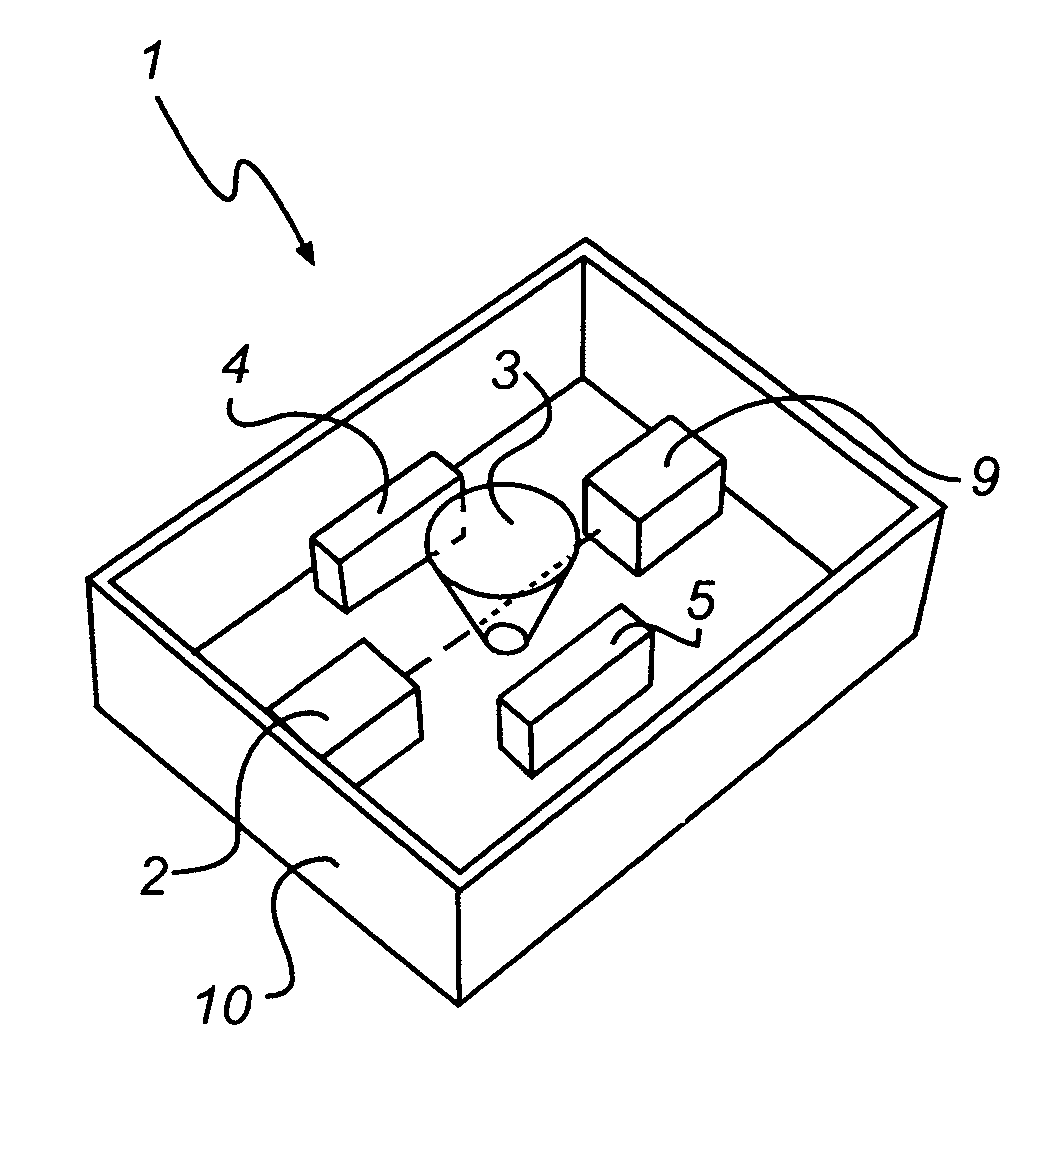 Apparatus and method for X-ray fluorescence analysis of a mineral sample